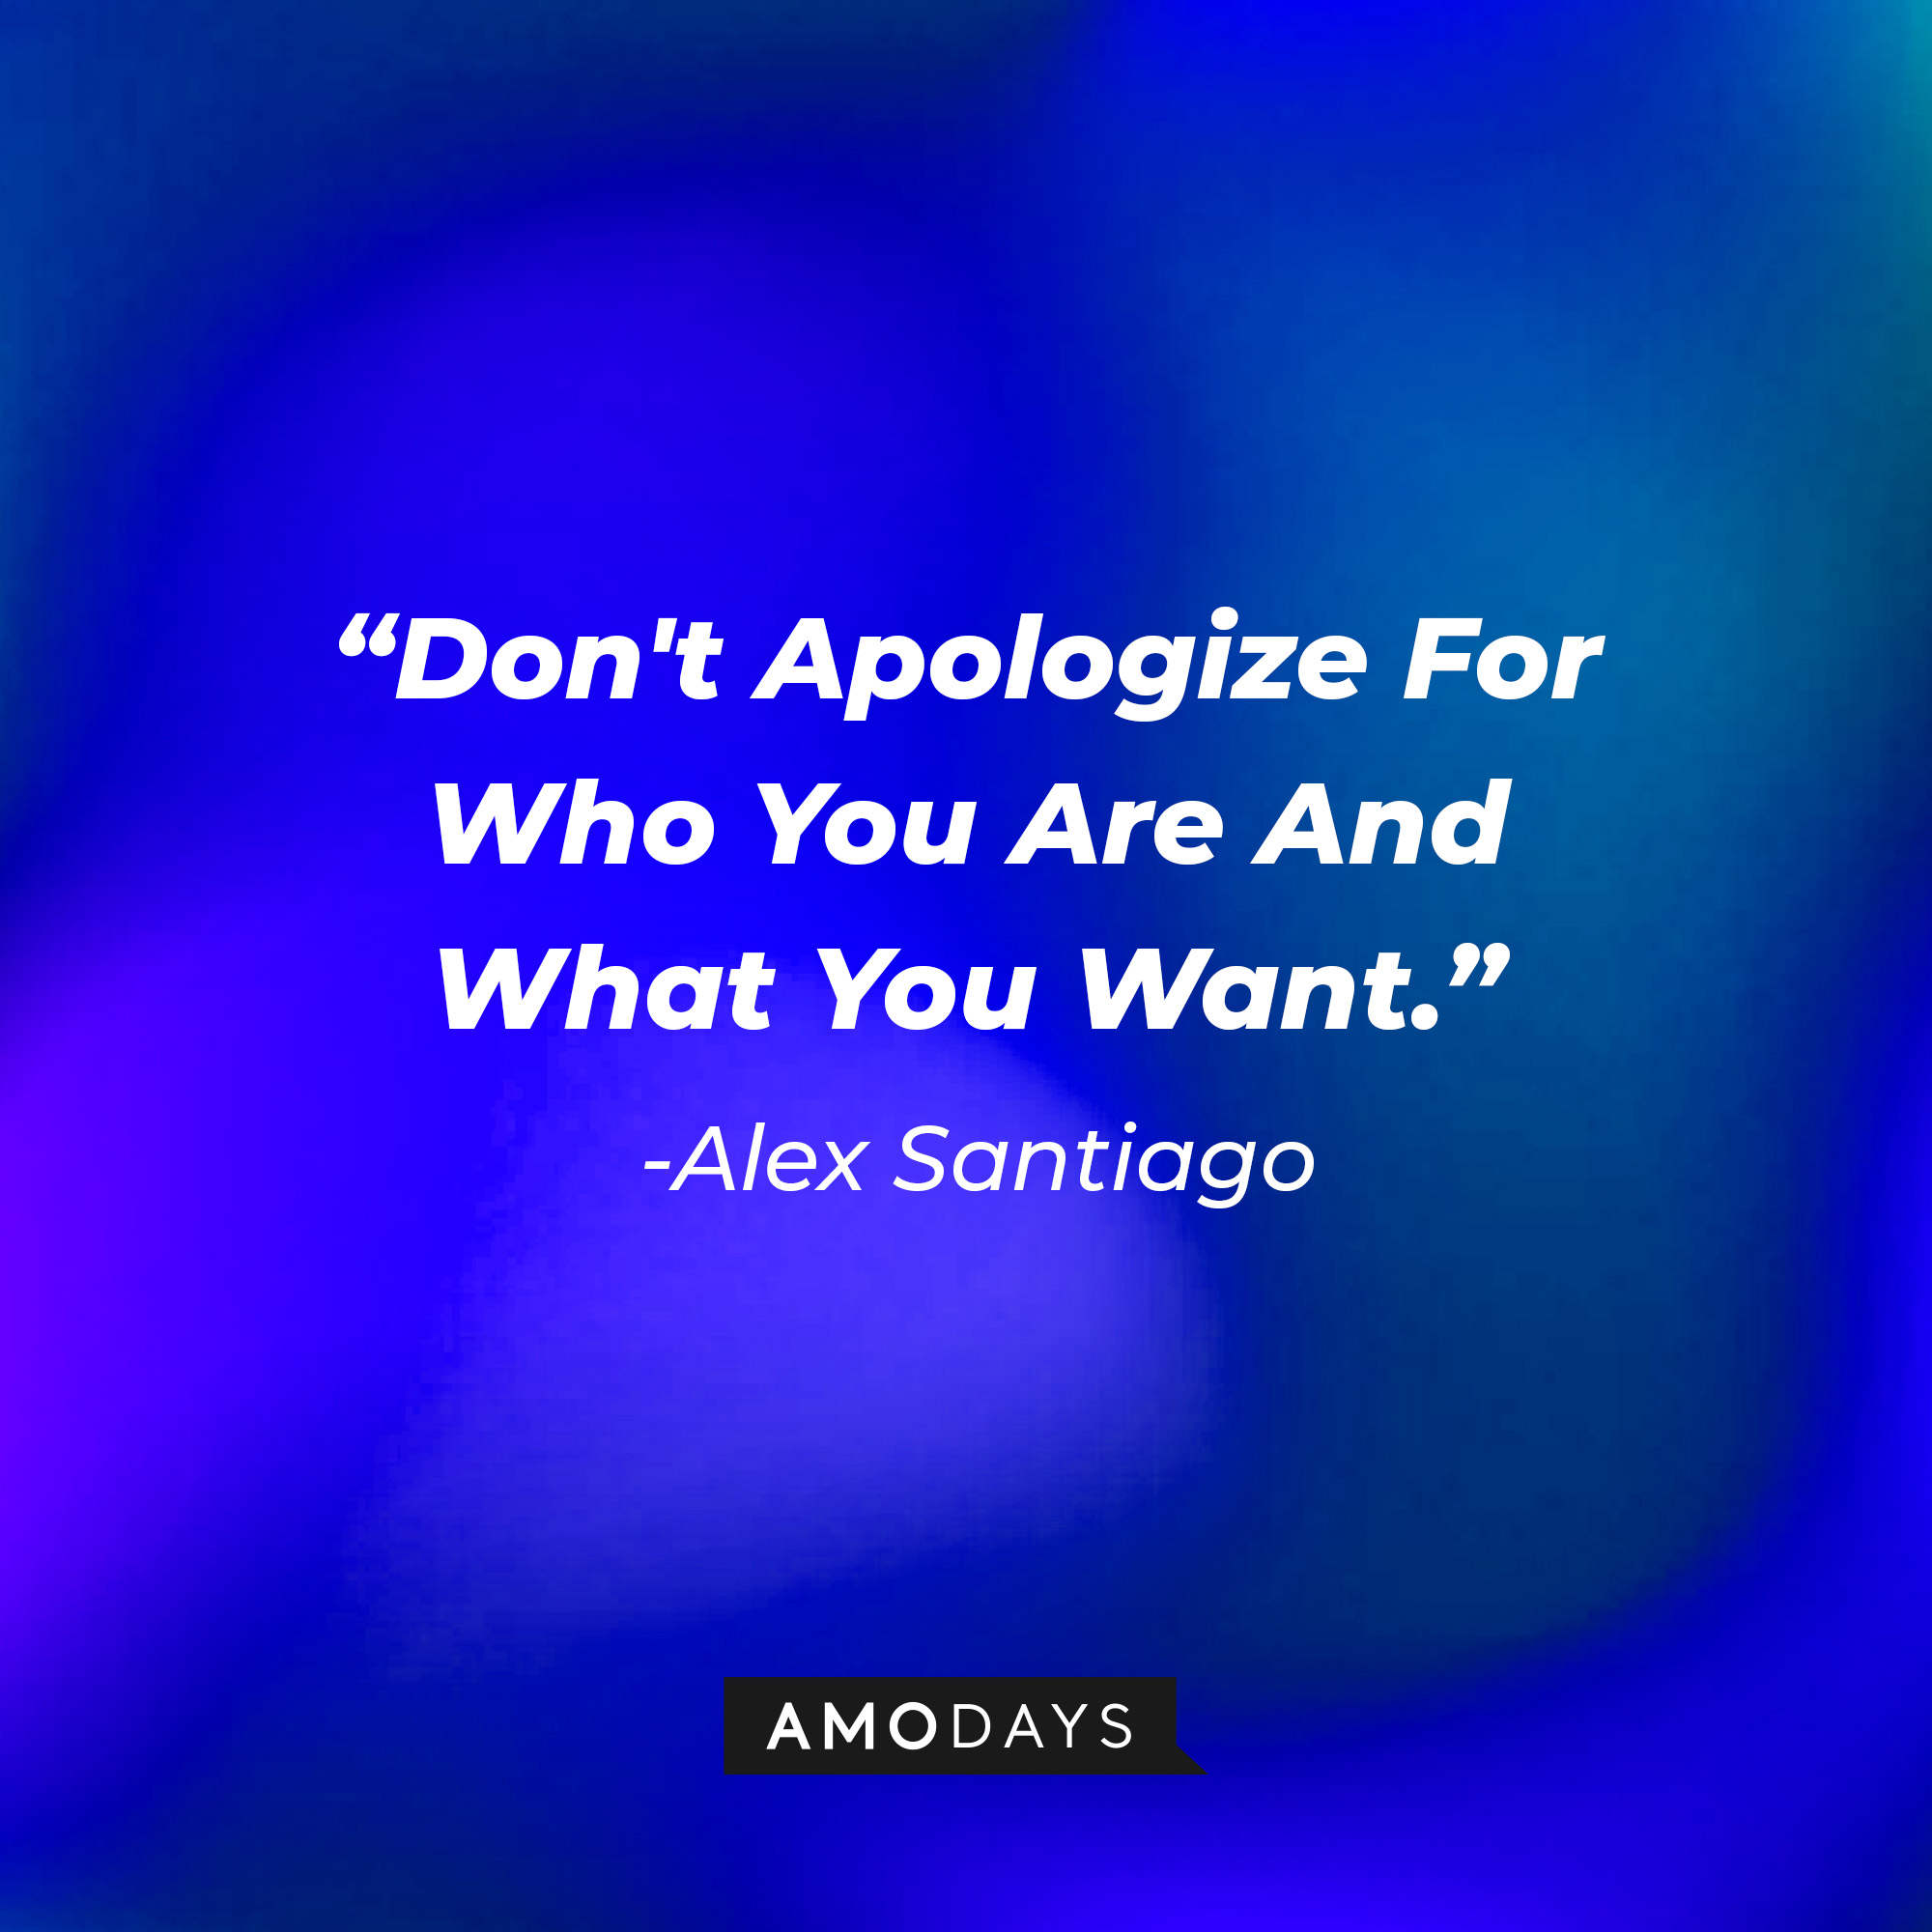 Alex Santiago's quote: "Don't Apologize For Who You Are And What You Want." | Source: Amodays